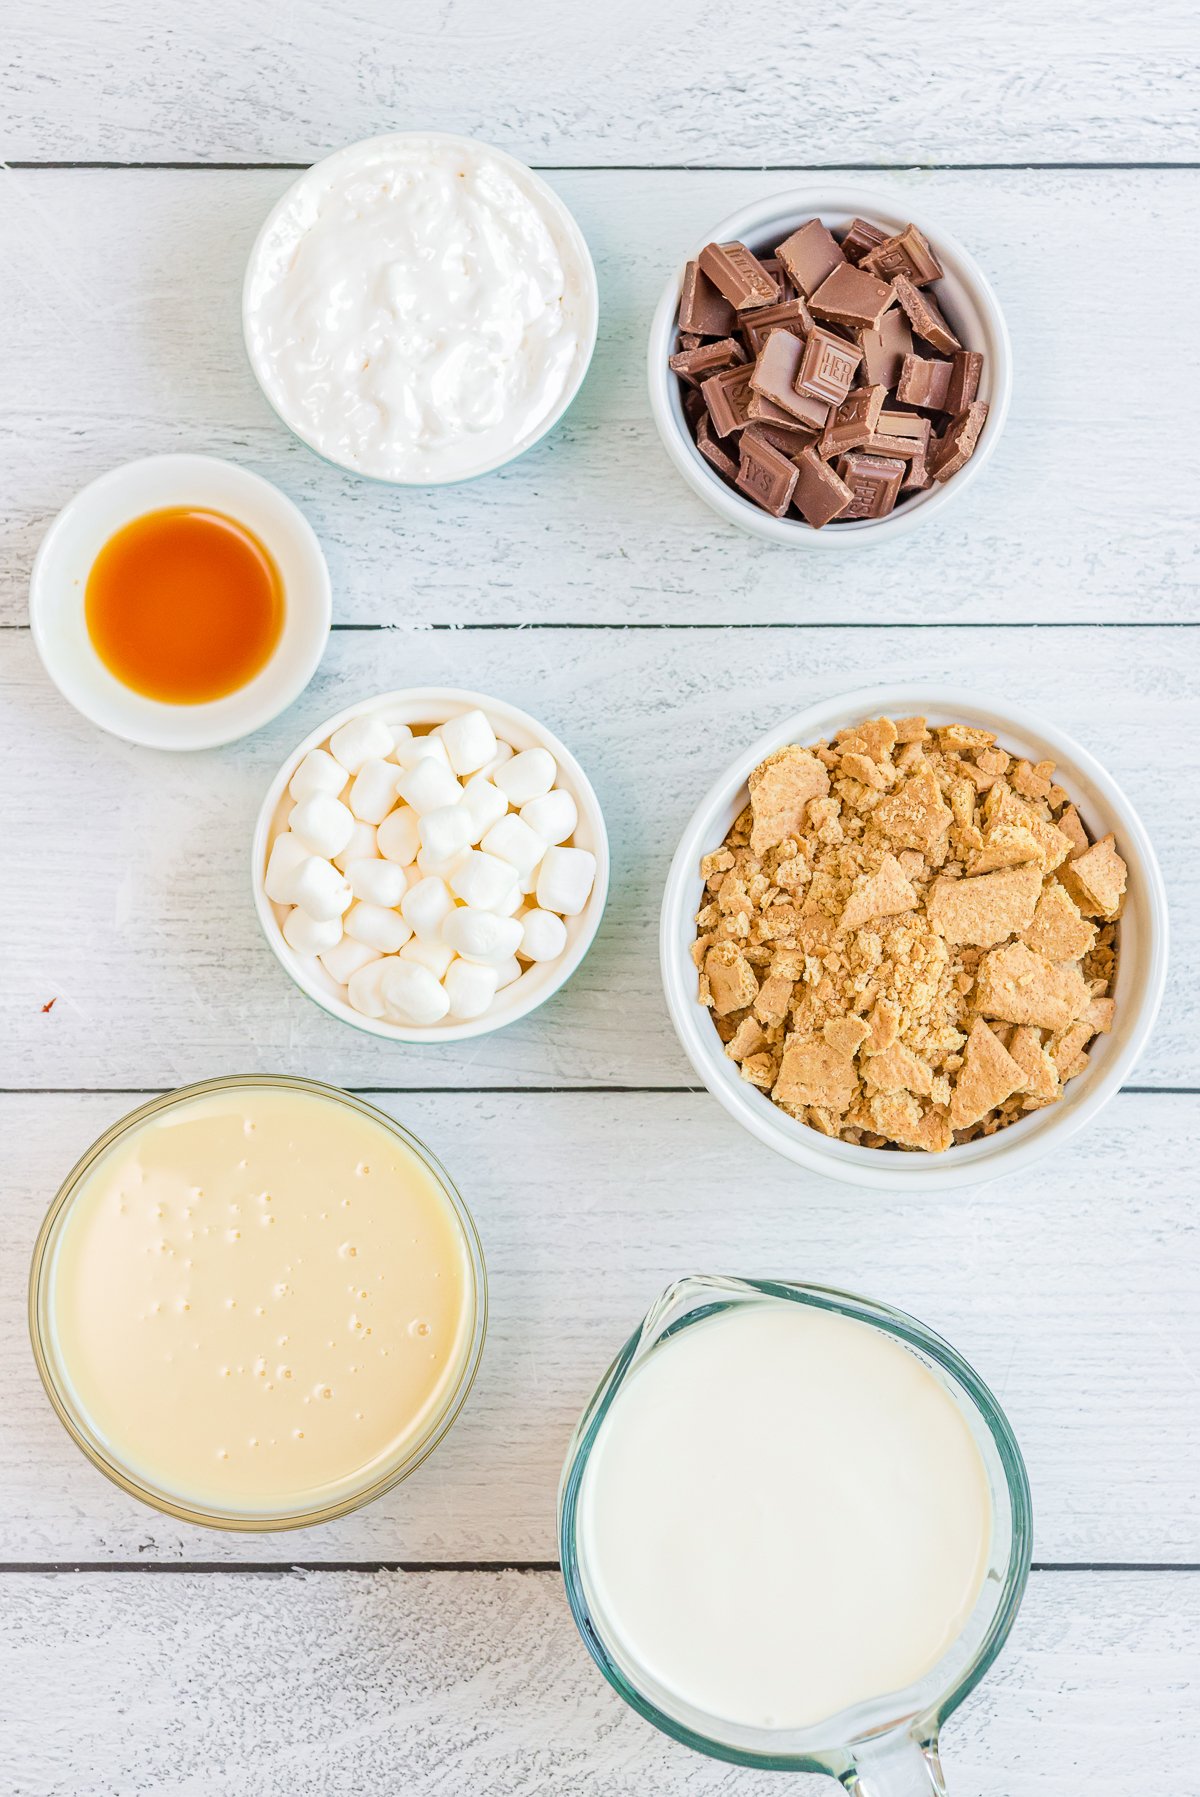 Ingredients needed to make S'mores Ice Cream.